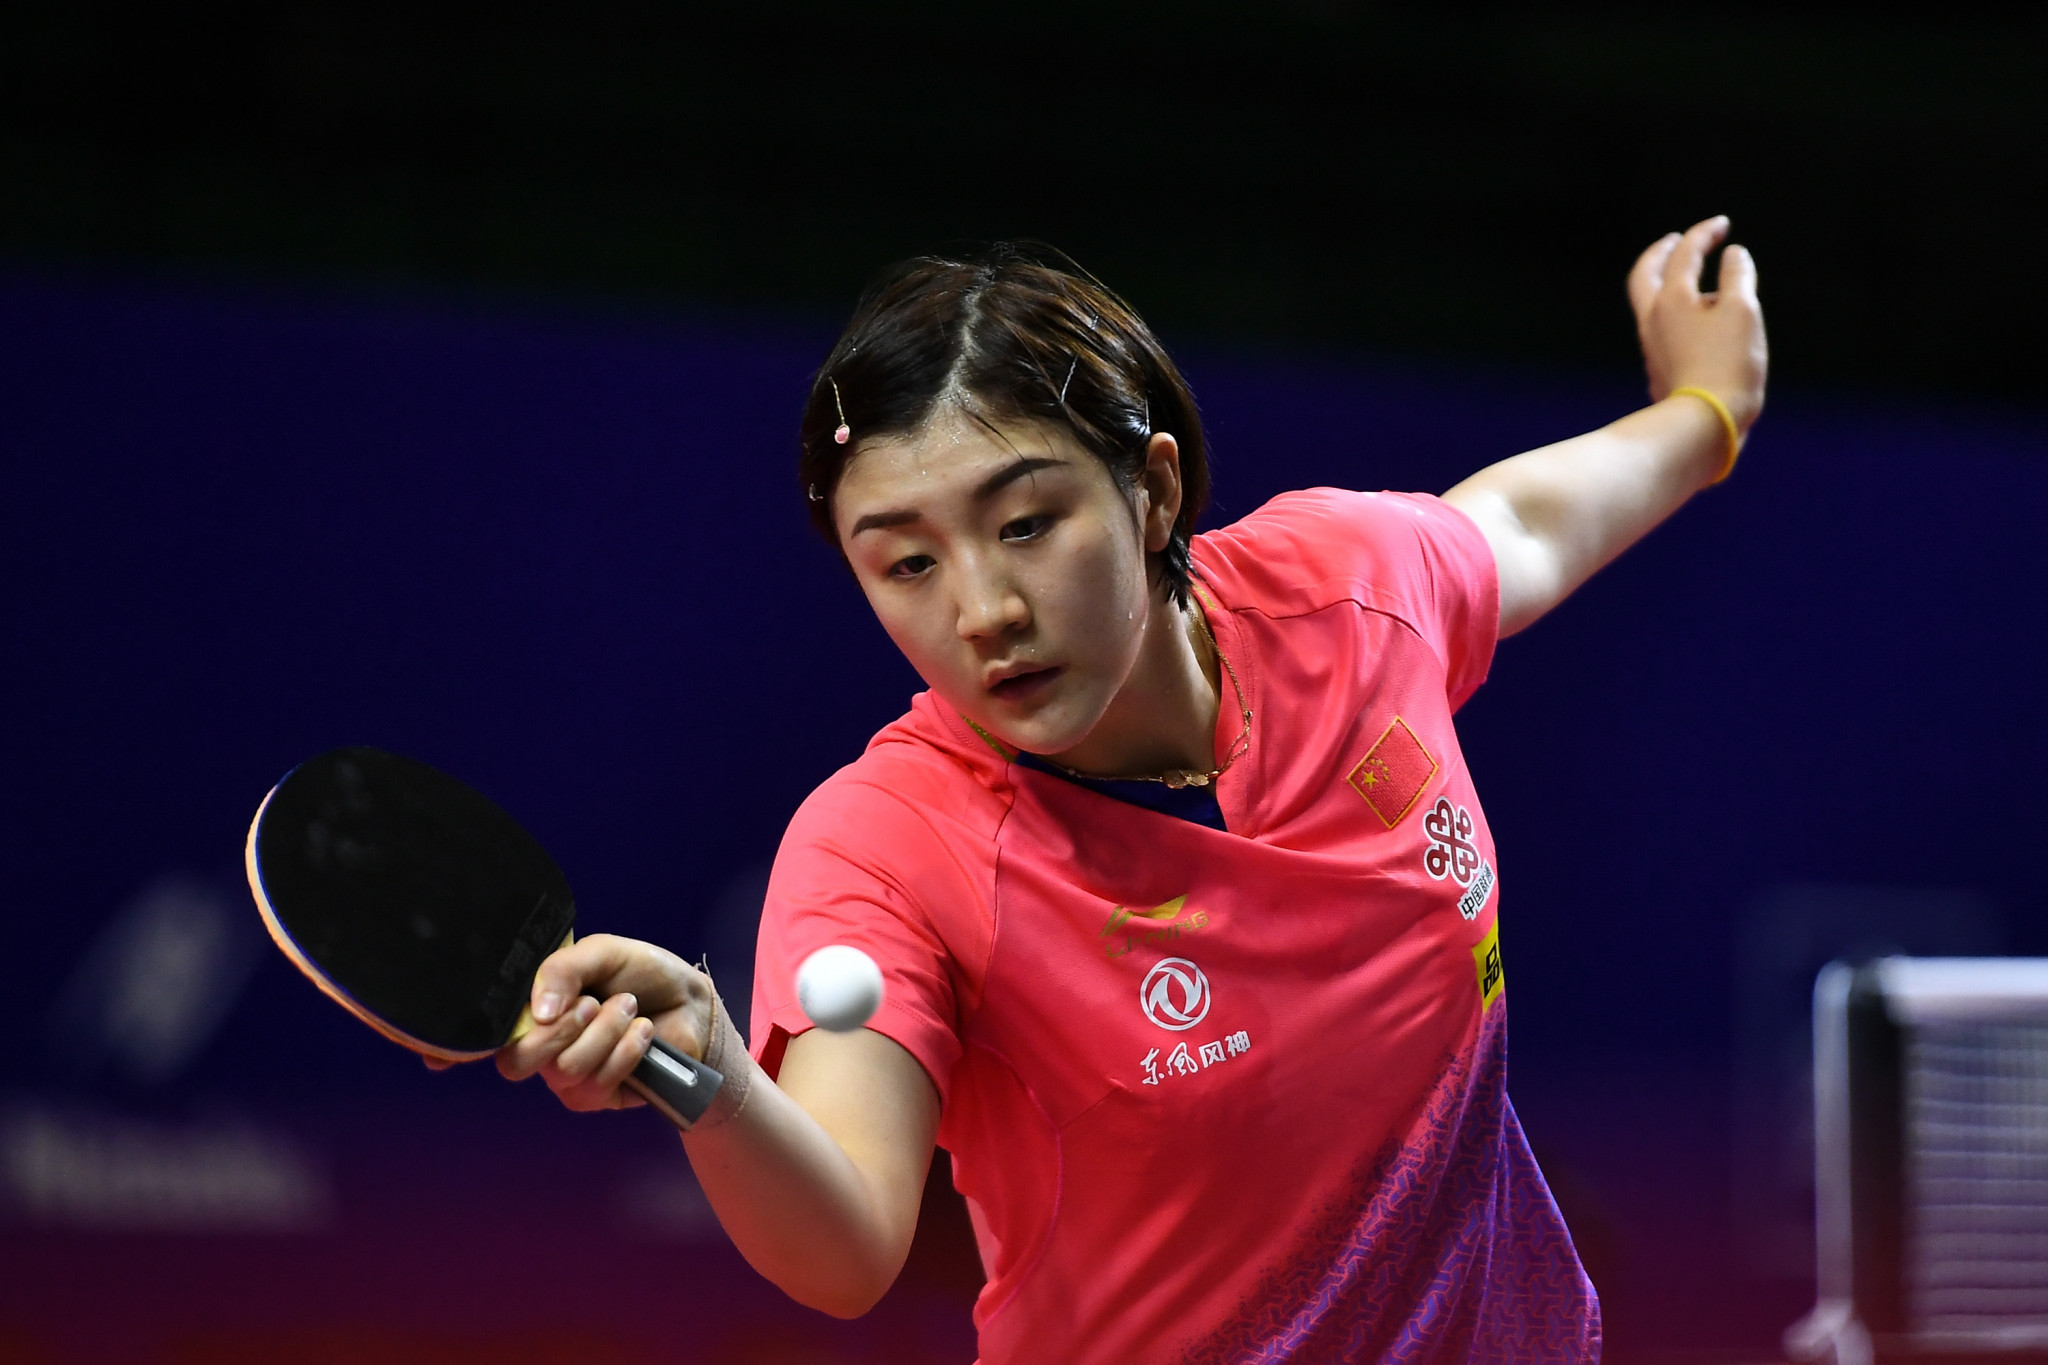 Chen Meng is through to the last 16 of the women's singles event ©Getty Images